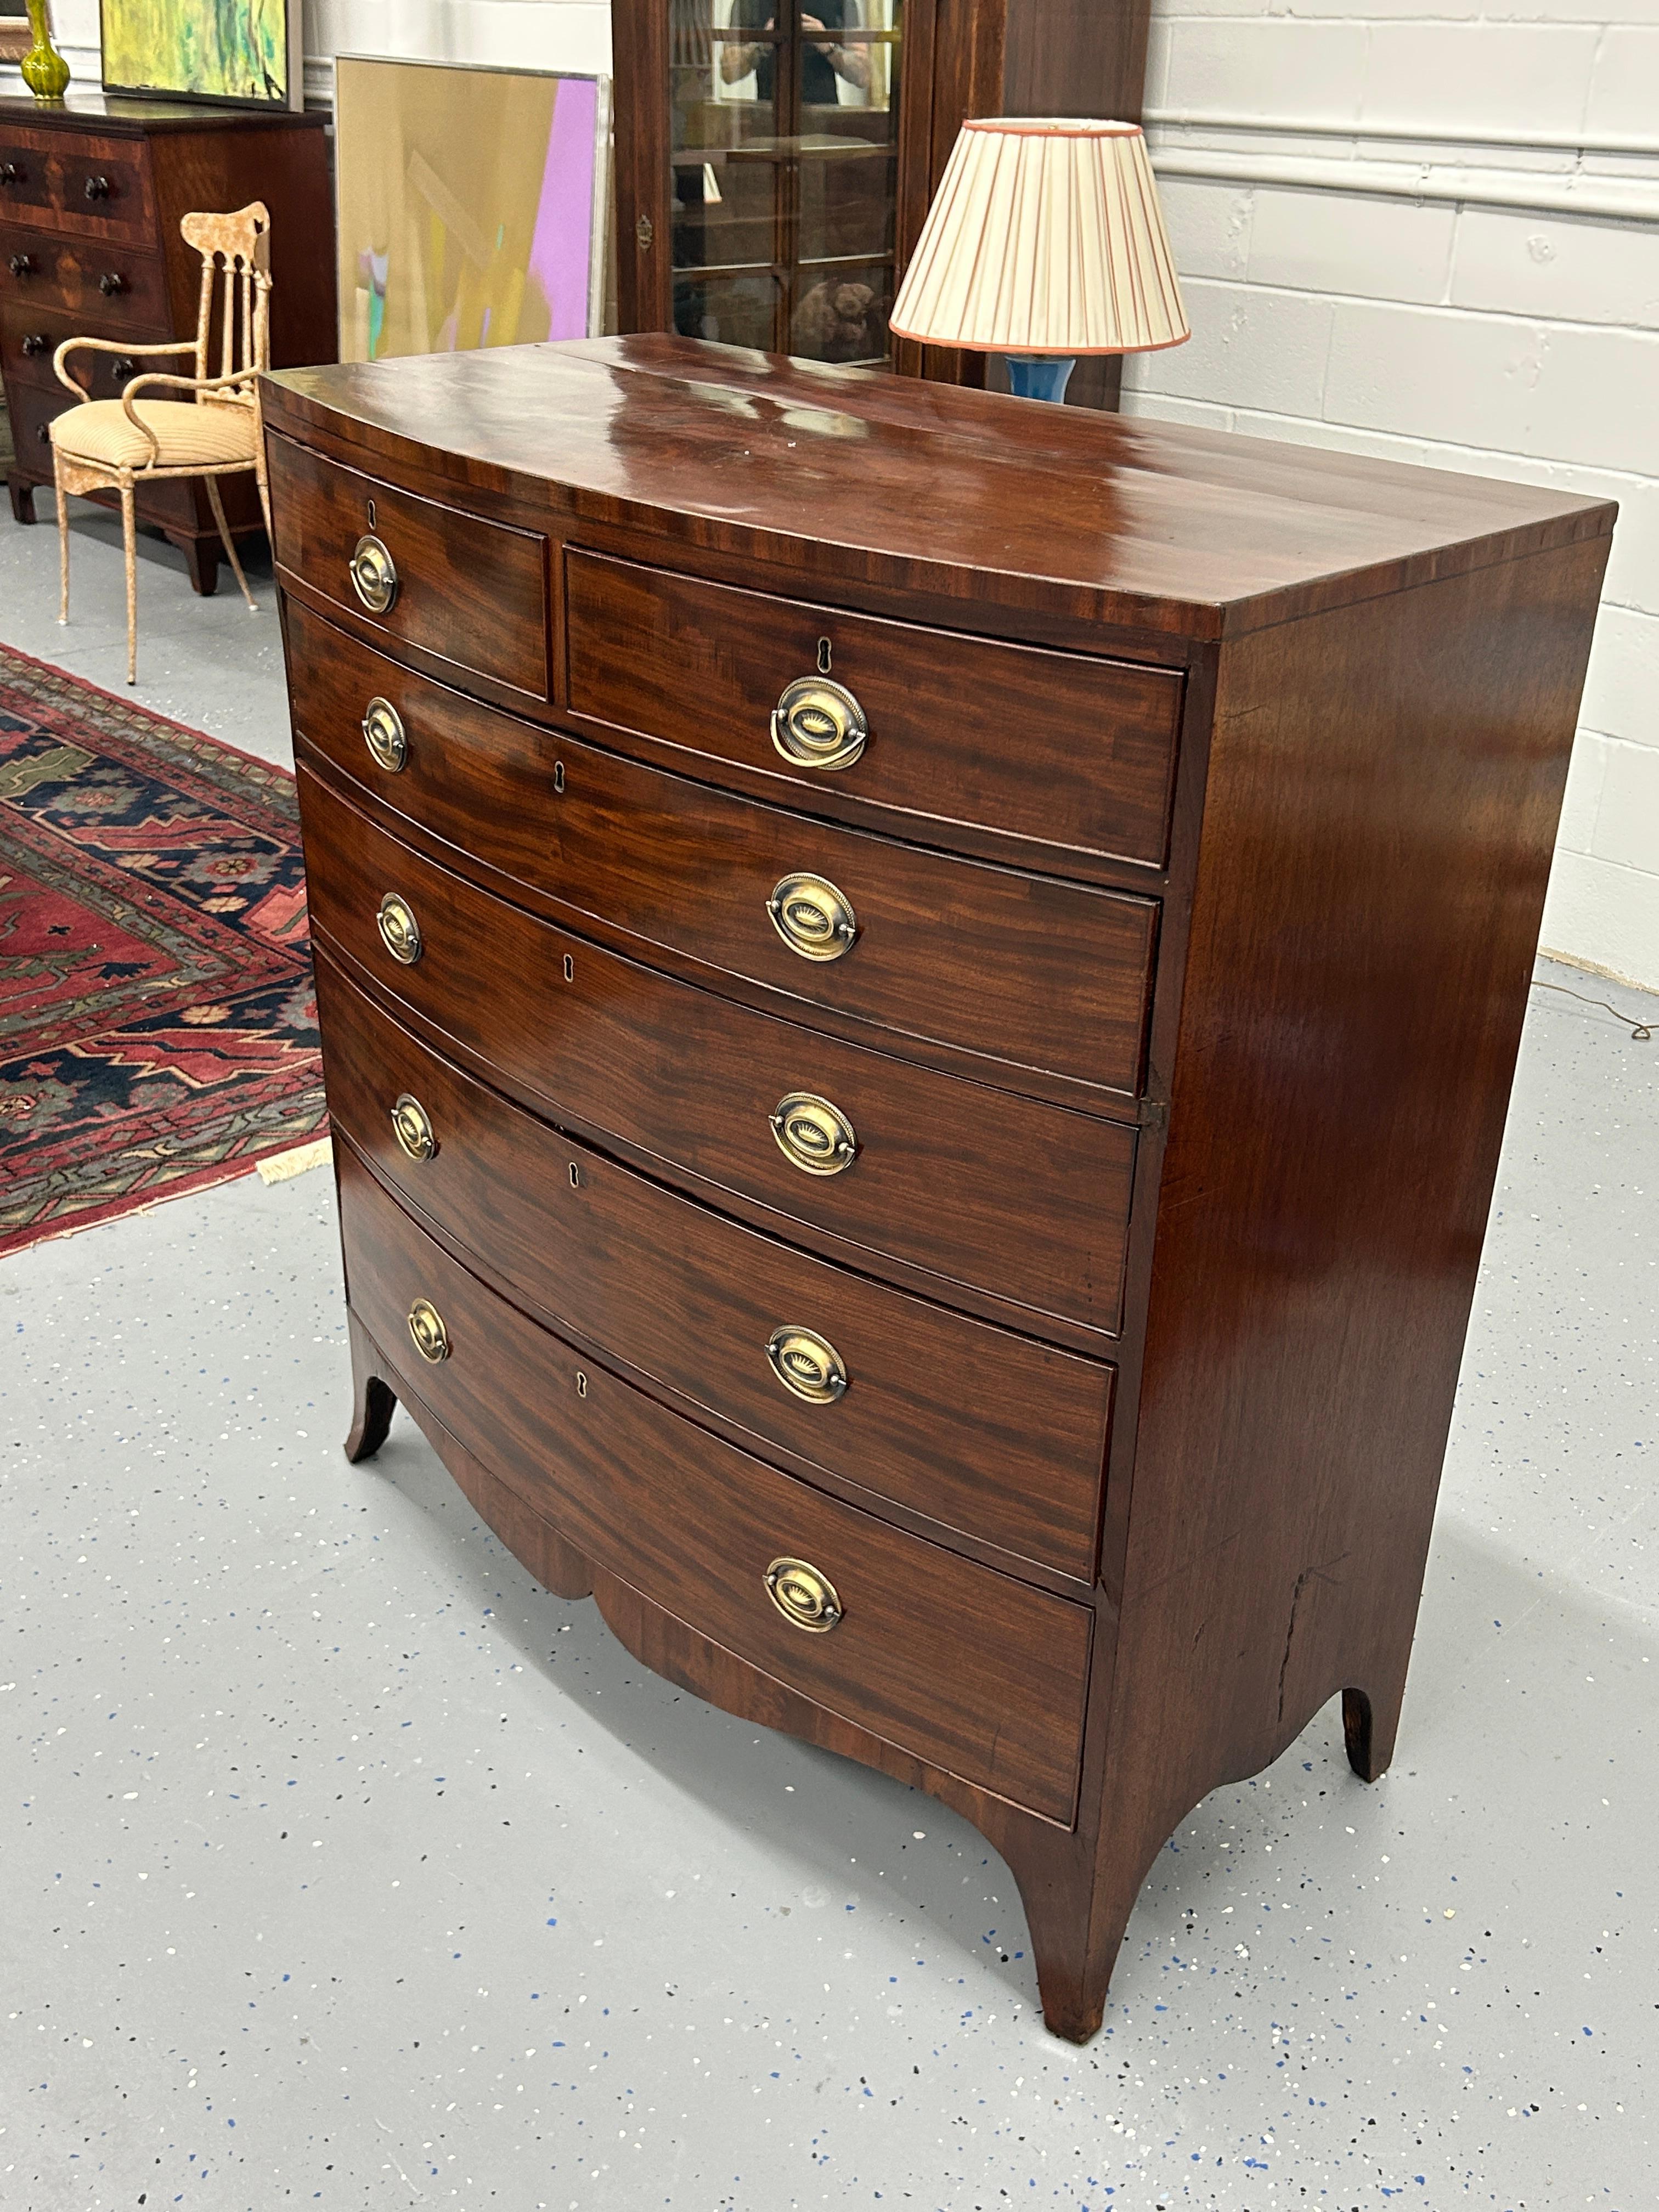 Presenting a timeless treasure from the 19th Century: an exquisite English Hepplewhite Chest of Drawers that effortlessly marries beauty and functionality. This remarkable piece showcases the elegance of the Hepplewhite style, adorned with features